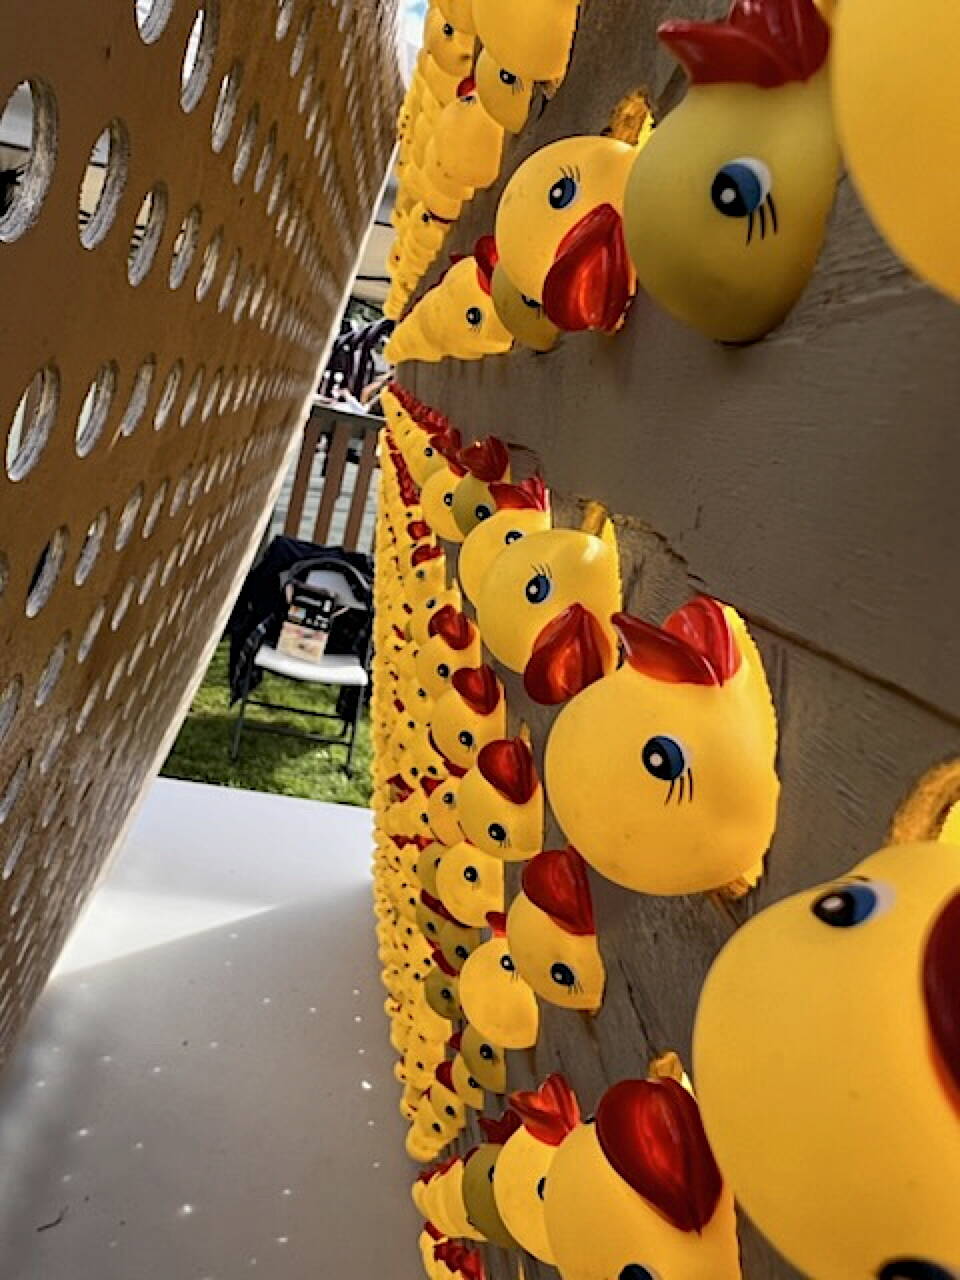 Rubber ducks await their fate during the Glacier Valley Rotary Duck Derby at Twin Lakes Park on Saturday. (Photo by Kelly Moore)